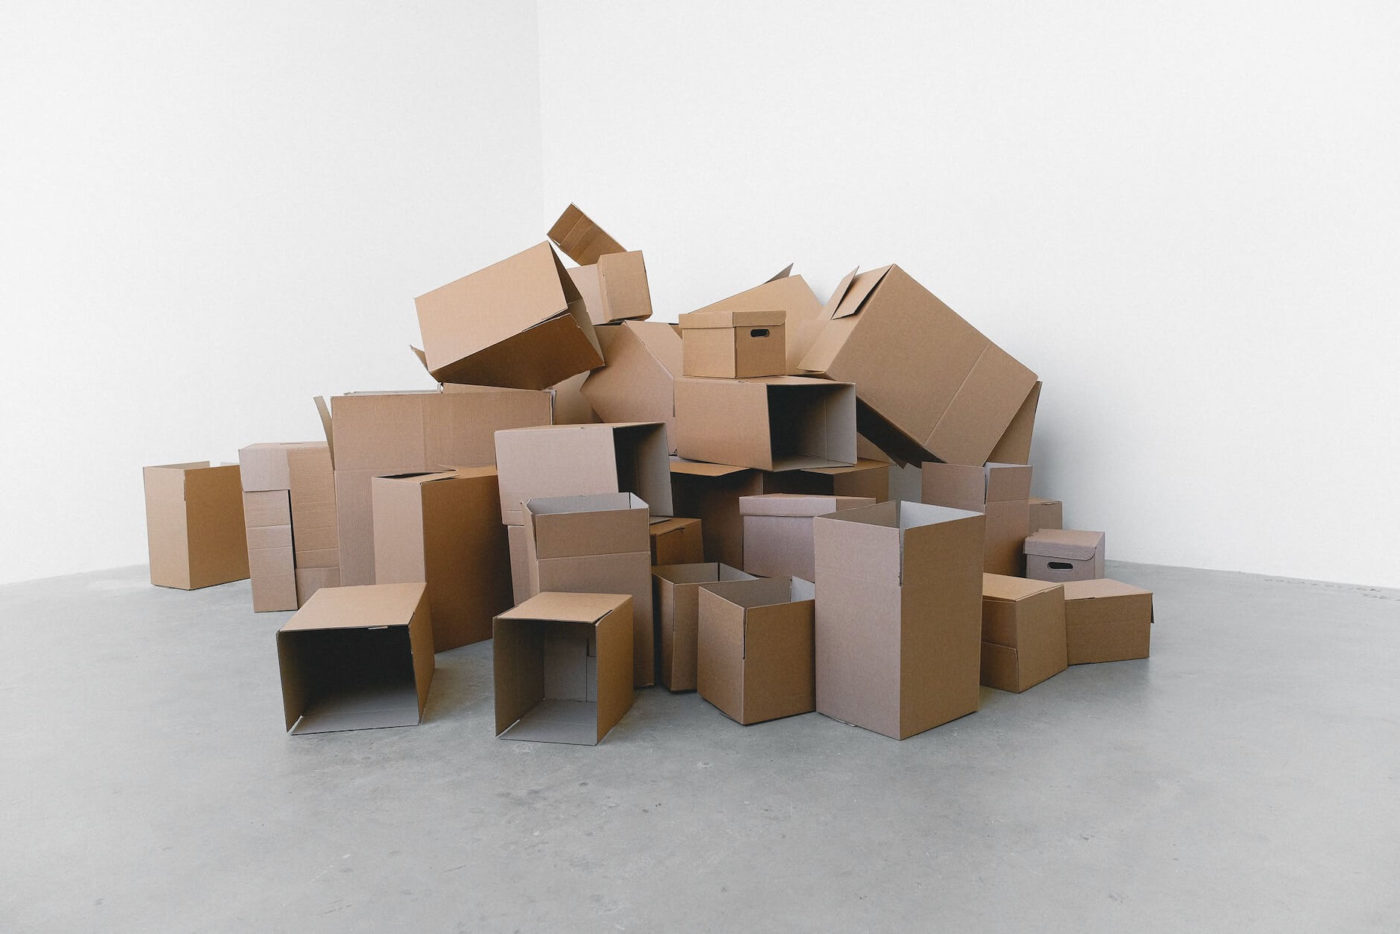 A pile of empty boxes on the floor